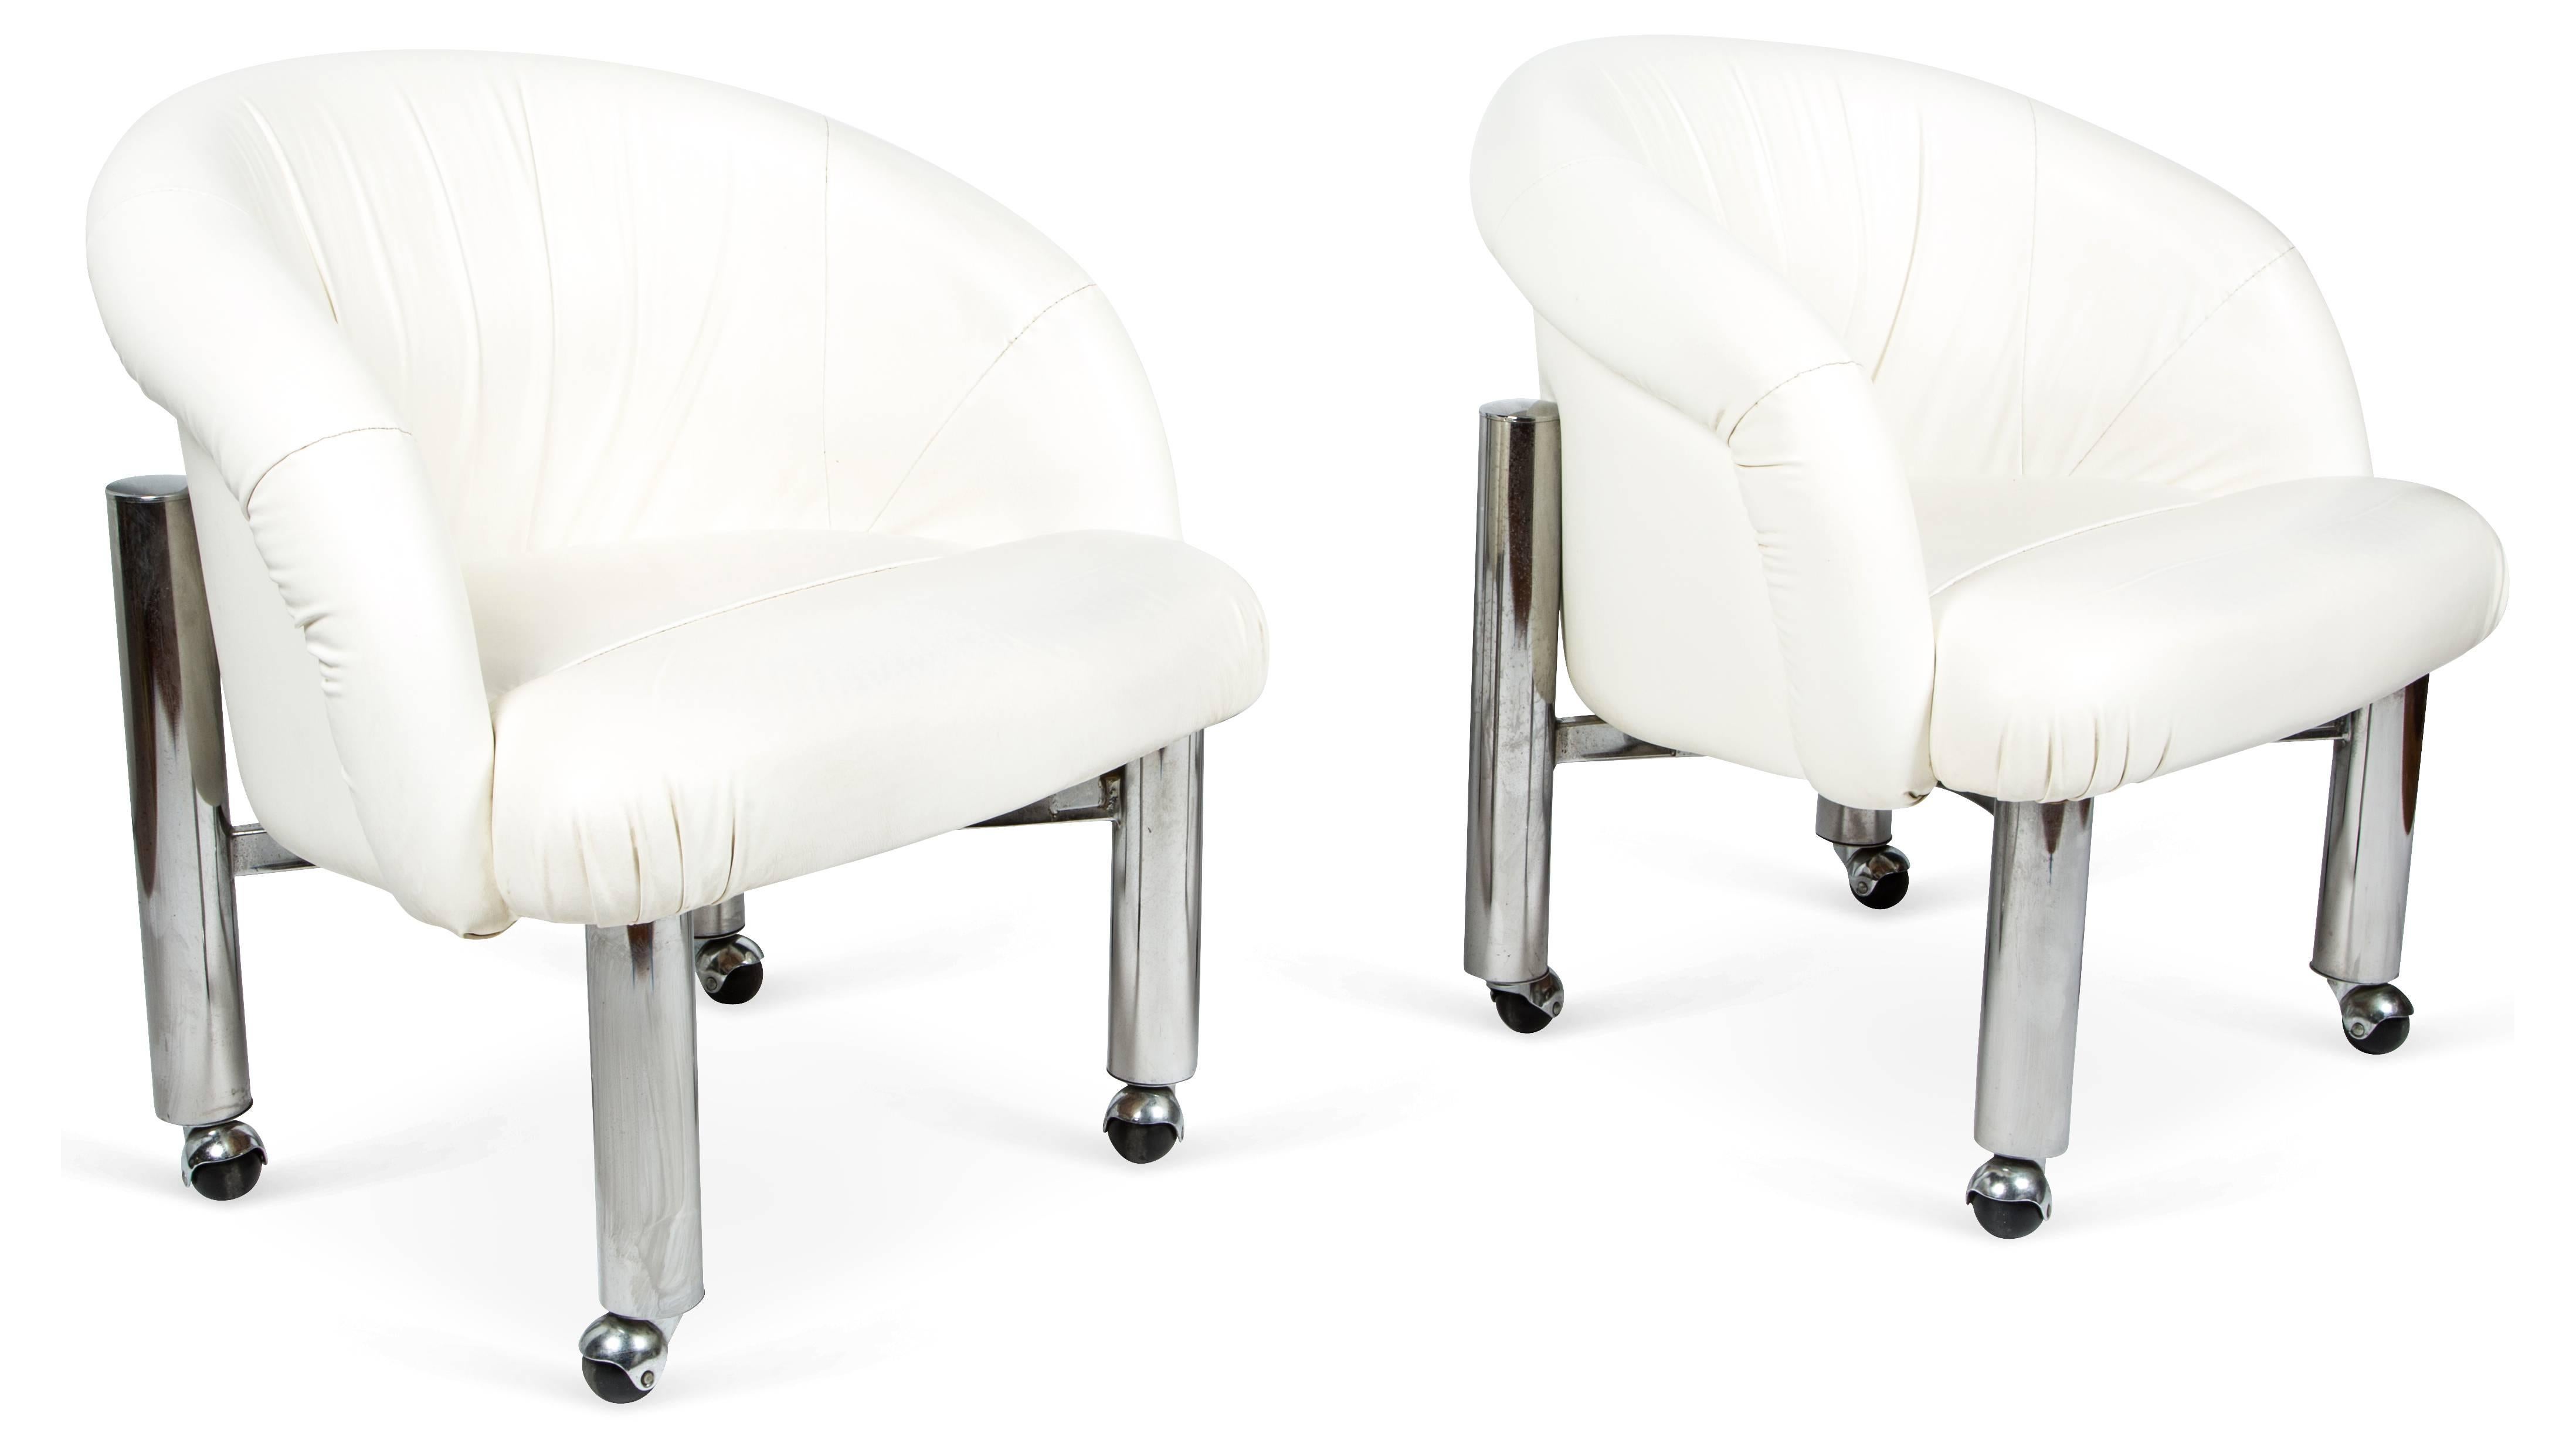 Set of four Midcentury lounge, dining, or game table chairs featuring tubular chrome frames and rolling casters. Original white faux leather white upholstery. These ultra glamorous armchairs are in the style of Milo Baughman for Design Institute